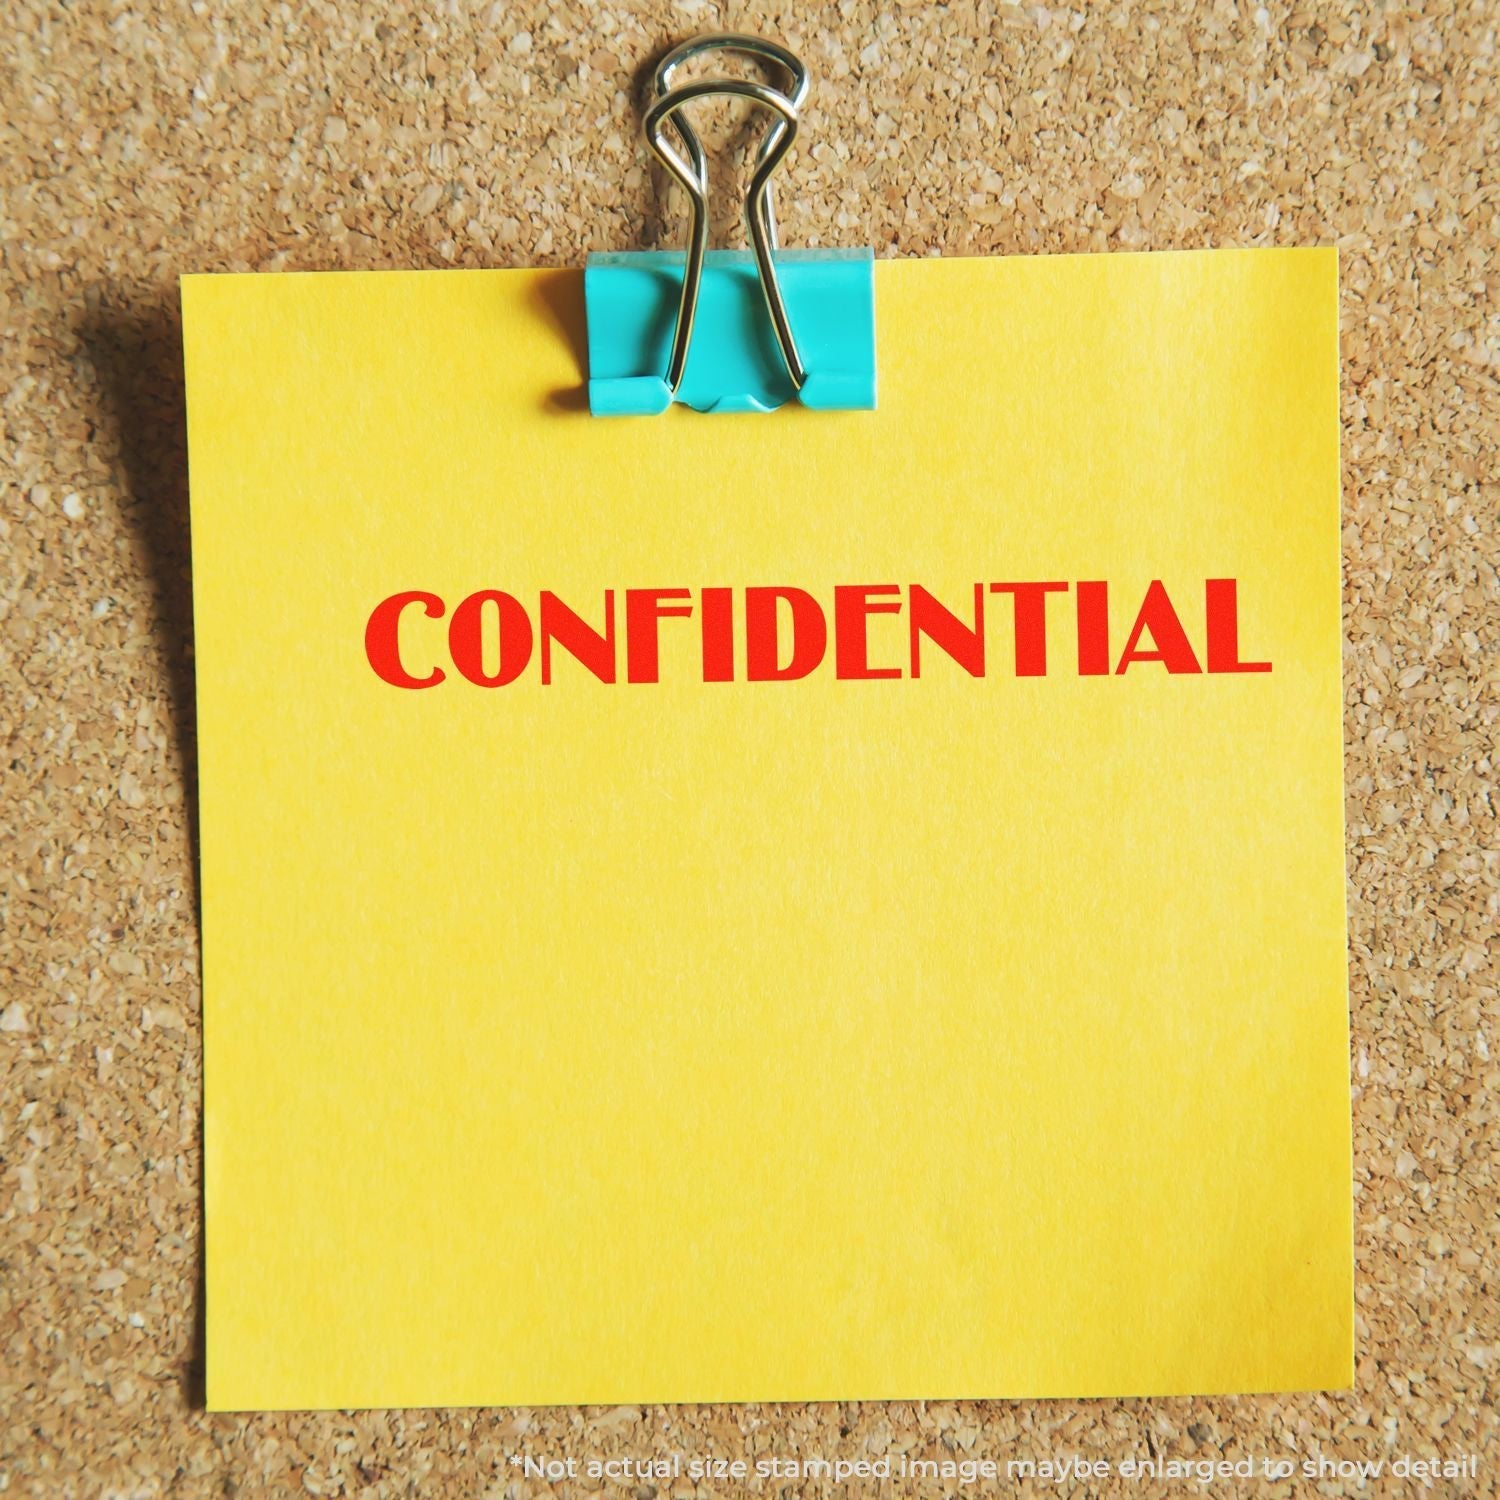 A self-inking stamp with a stamped image showing how the text "CONFIDENTIAL" in an optima font is displayed after stamping.